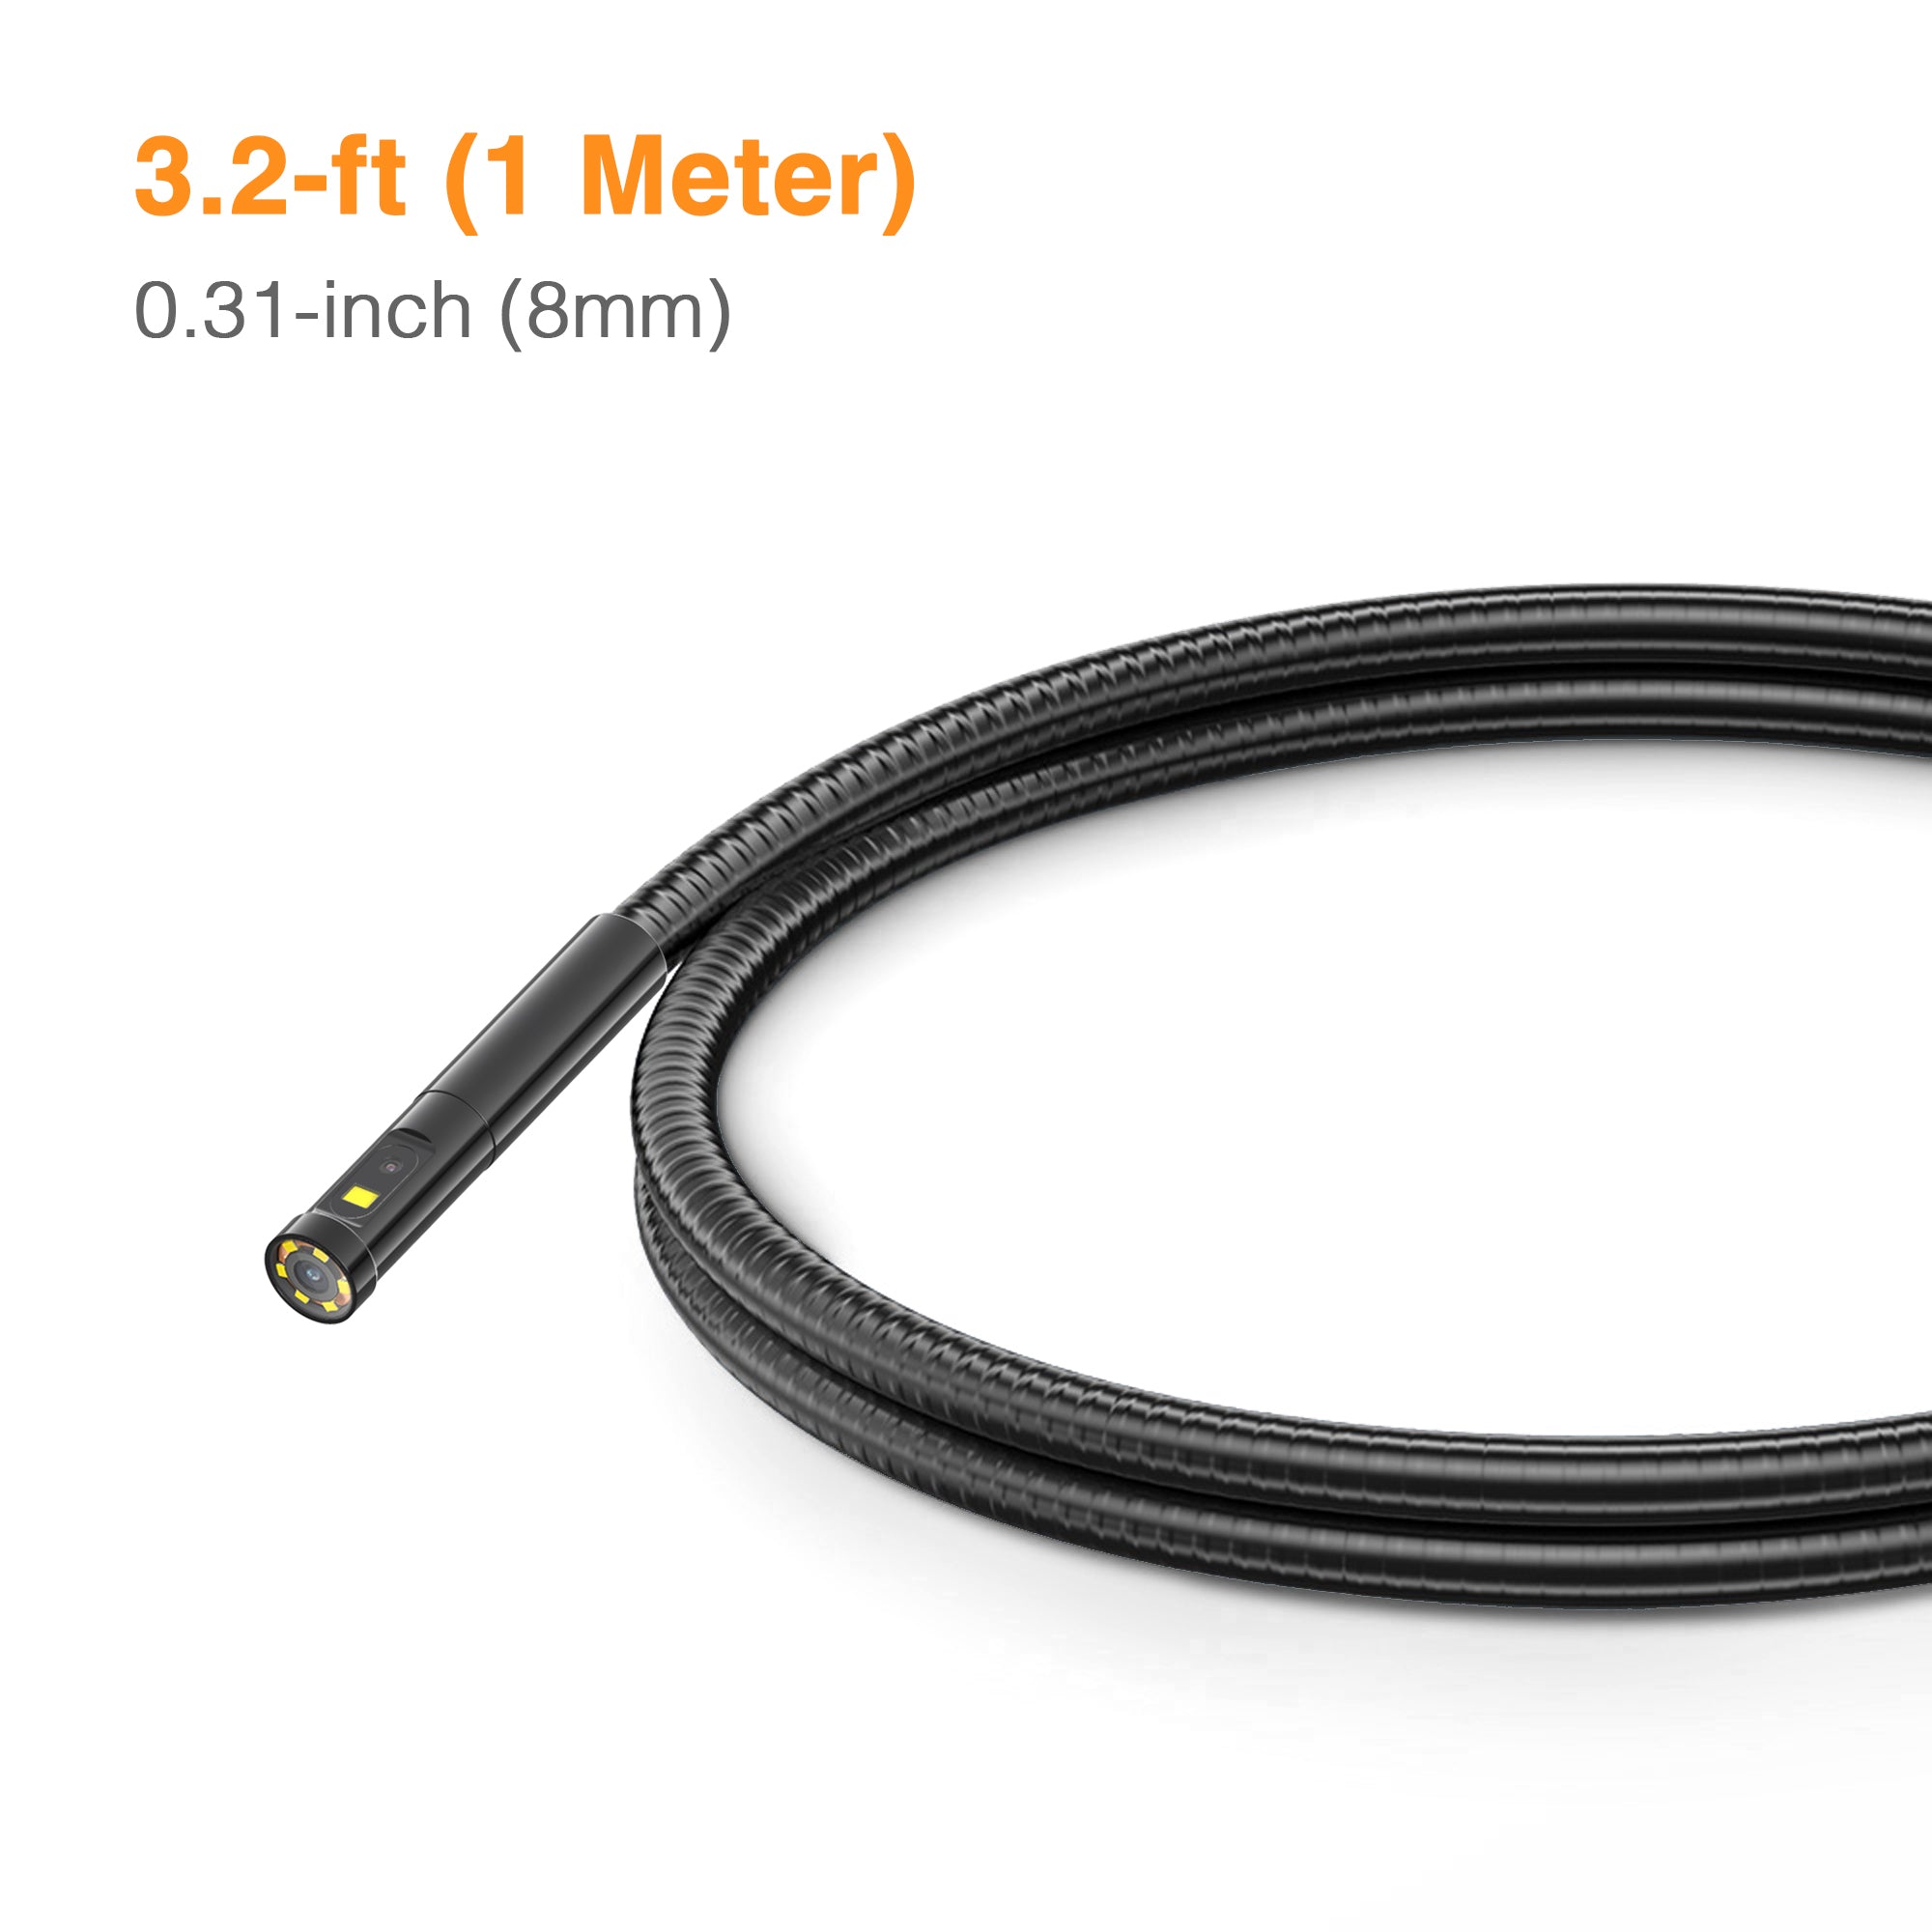 Dual-Lens Flexible Inspection Camera Probes - 0.31 in (8 mm)